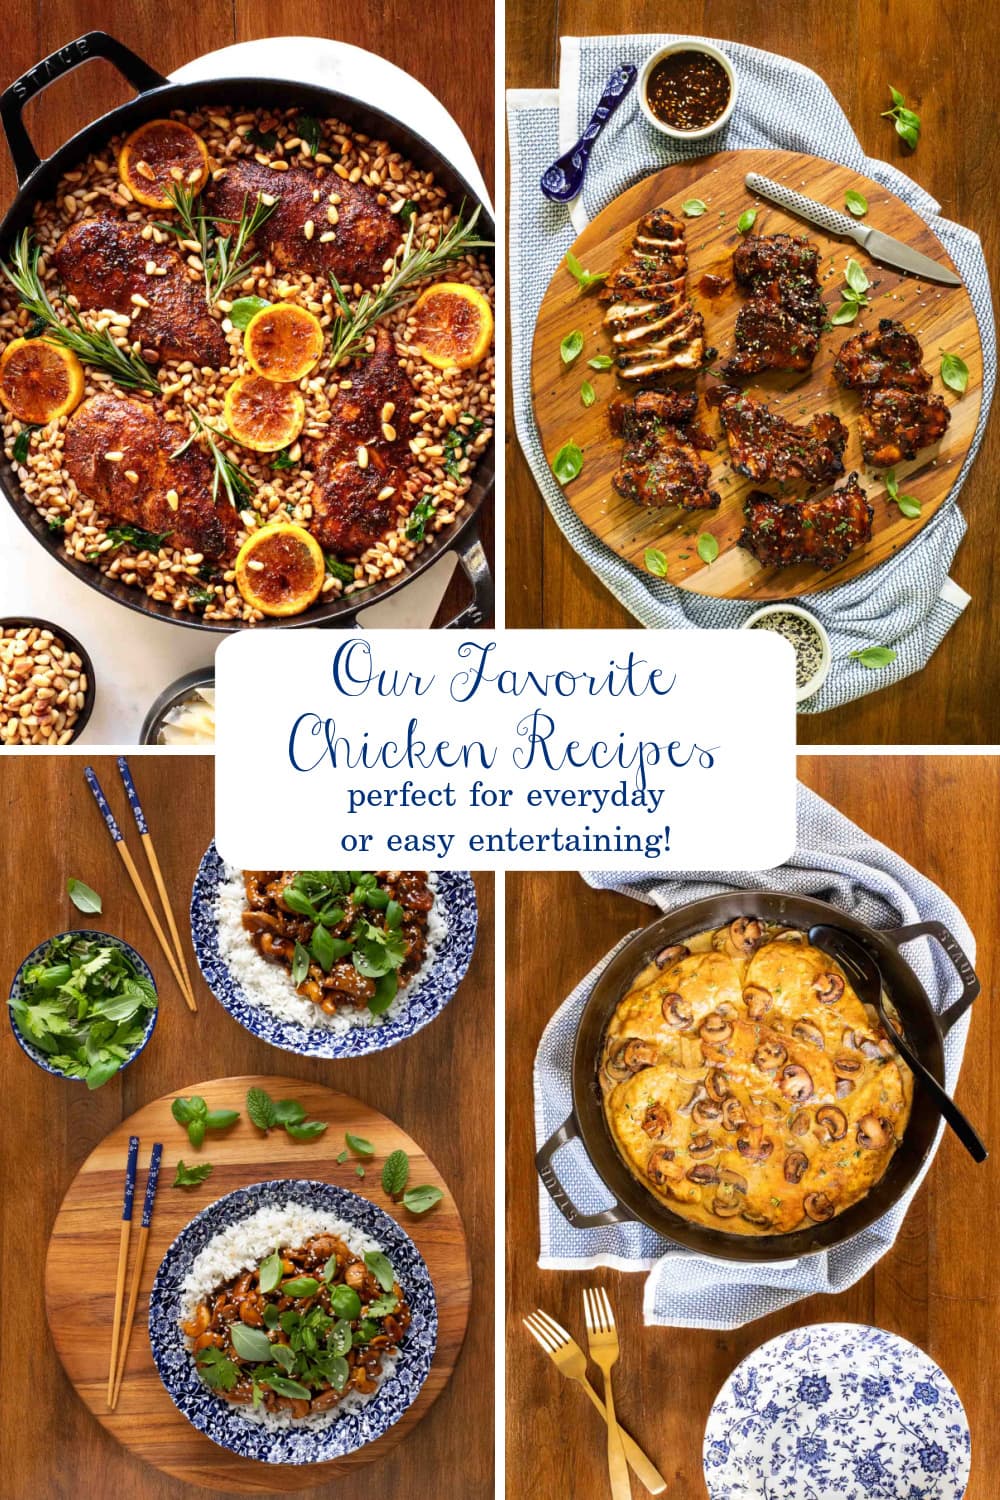 Ten Easy, Delicious Recipes to Take the Boring out of Chicken!